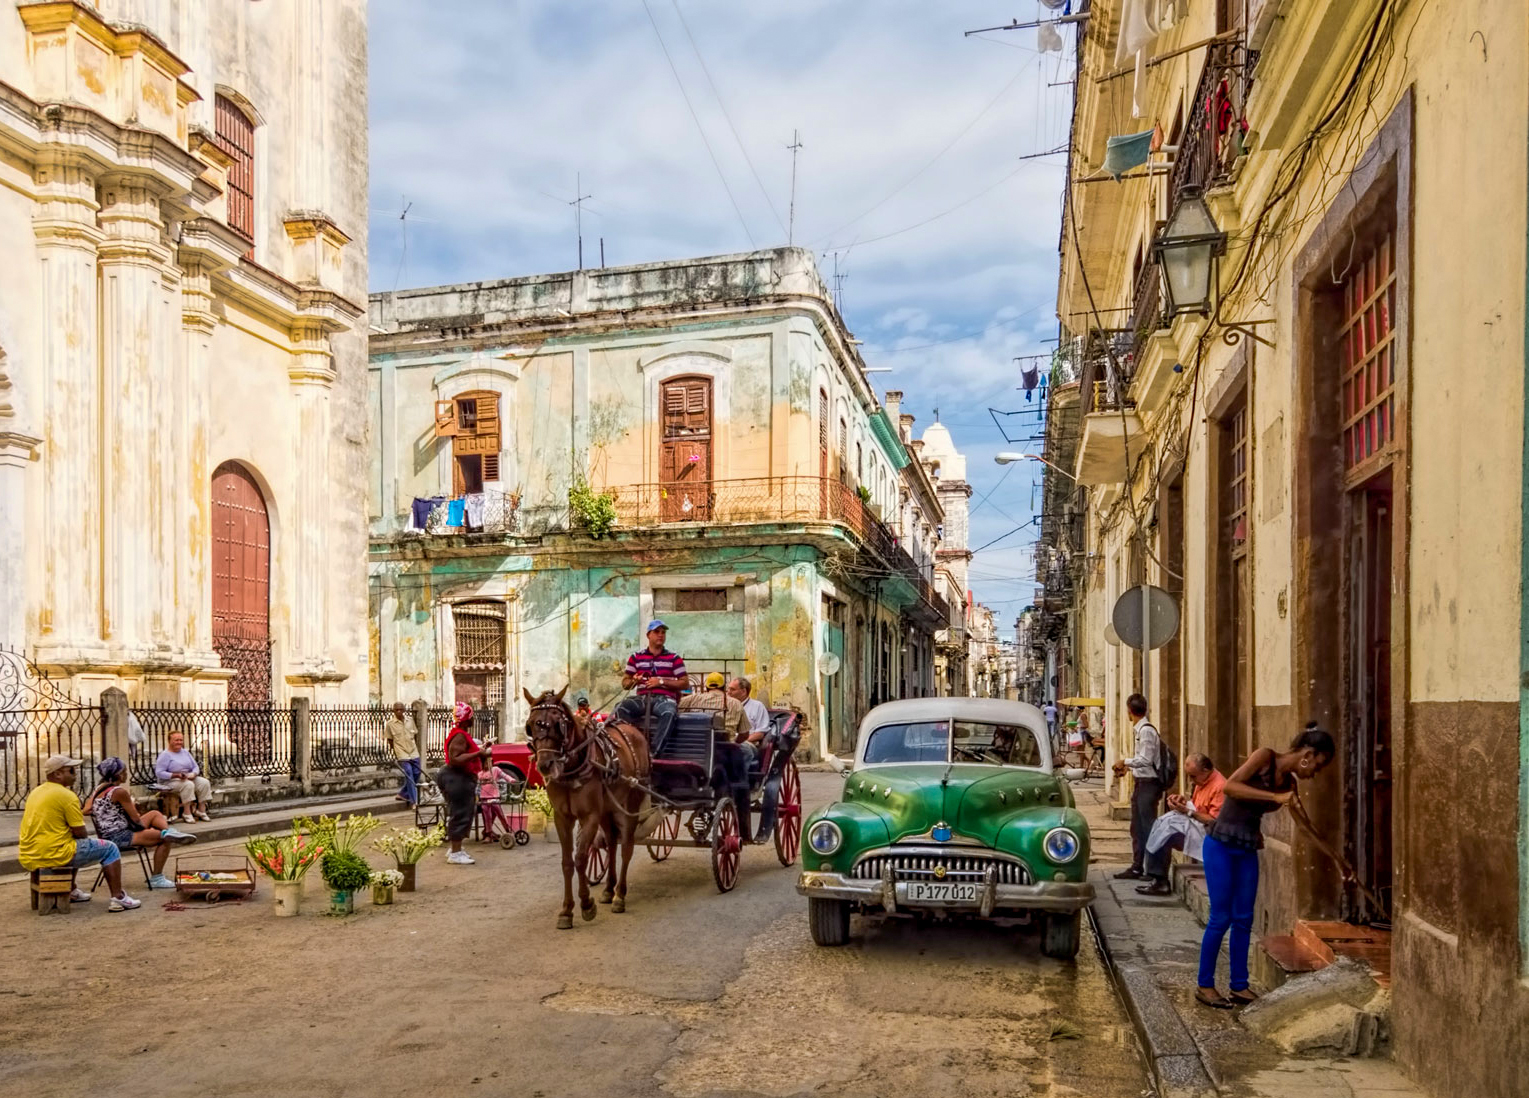 Old Havana (Habana Vieja) and its fortification system